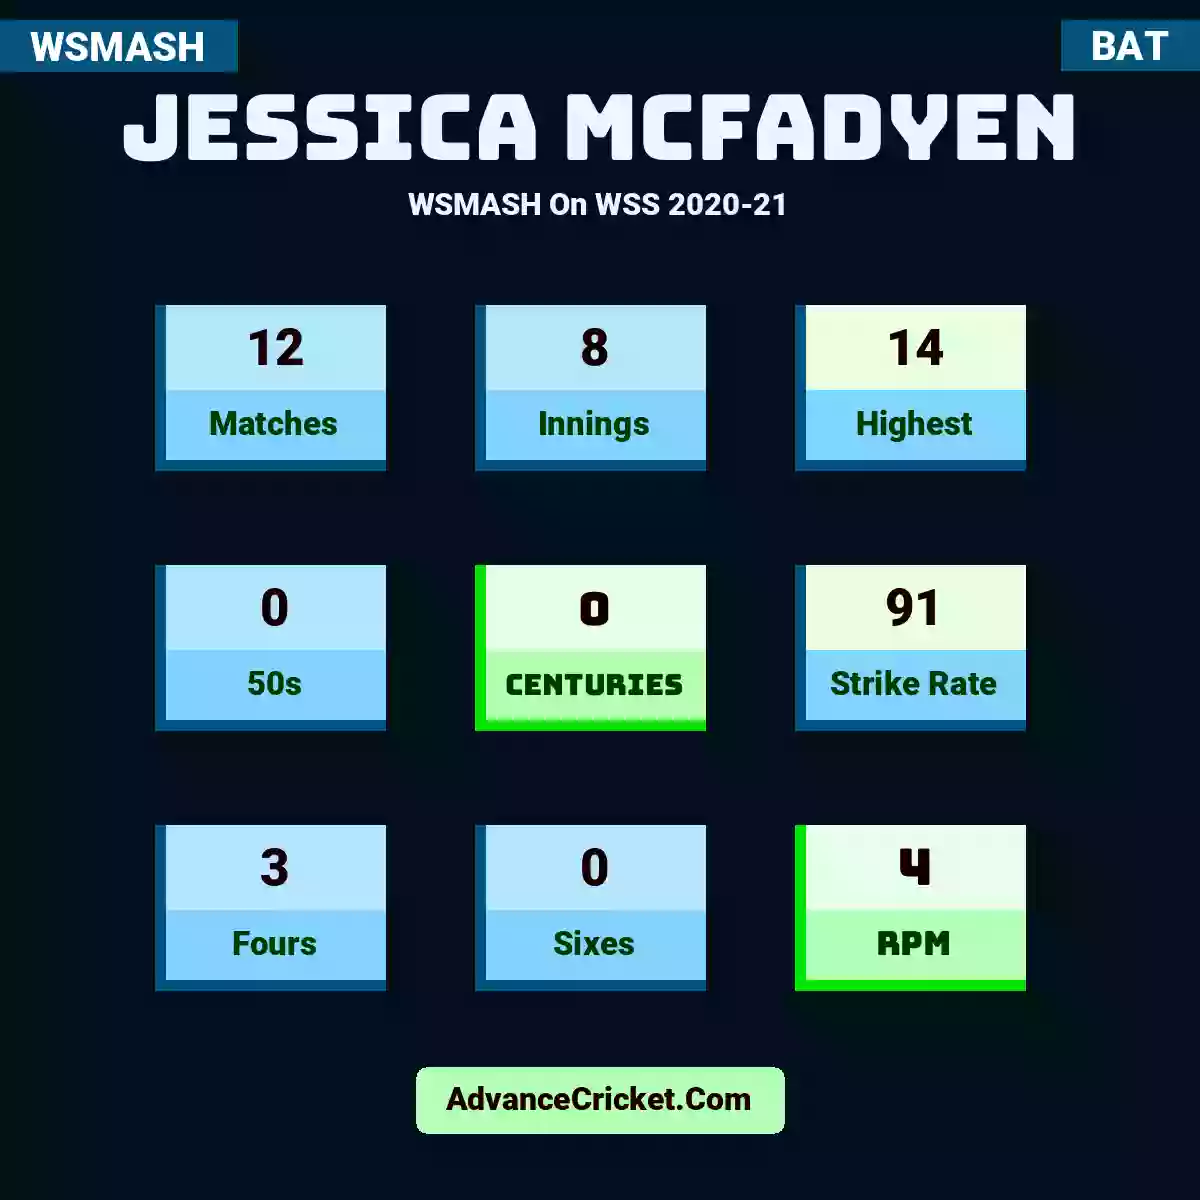 Jessica McFadyen WSMASH  On WSS 2020-21, Jessica McFadyen played 12 matches, scored 14 runs as highest, 0 half-centuries, and 0 centuries, with a strike rate of 91. J.McFadyen hit 3 fours and 0 sixes, with an RPM of 4.